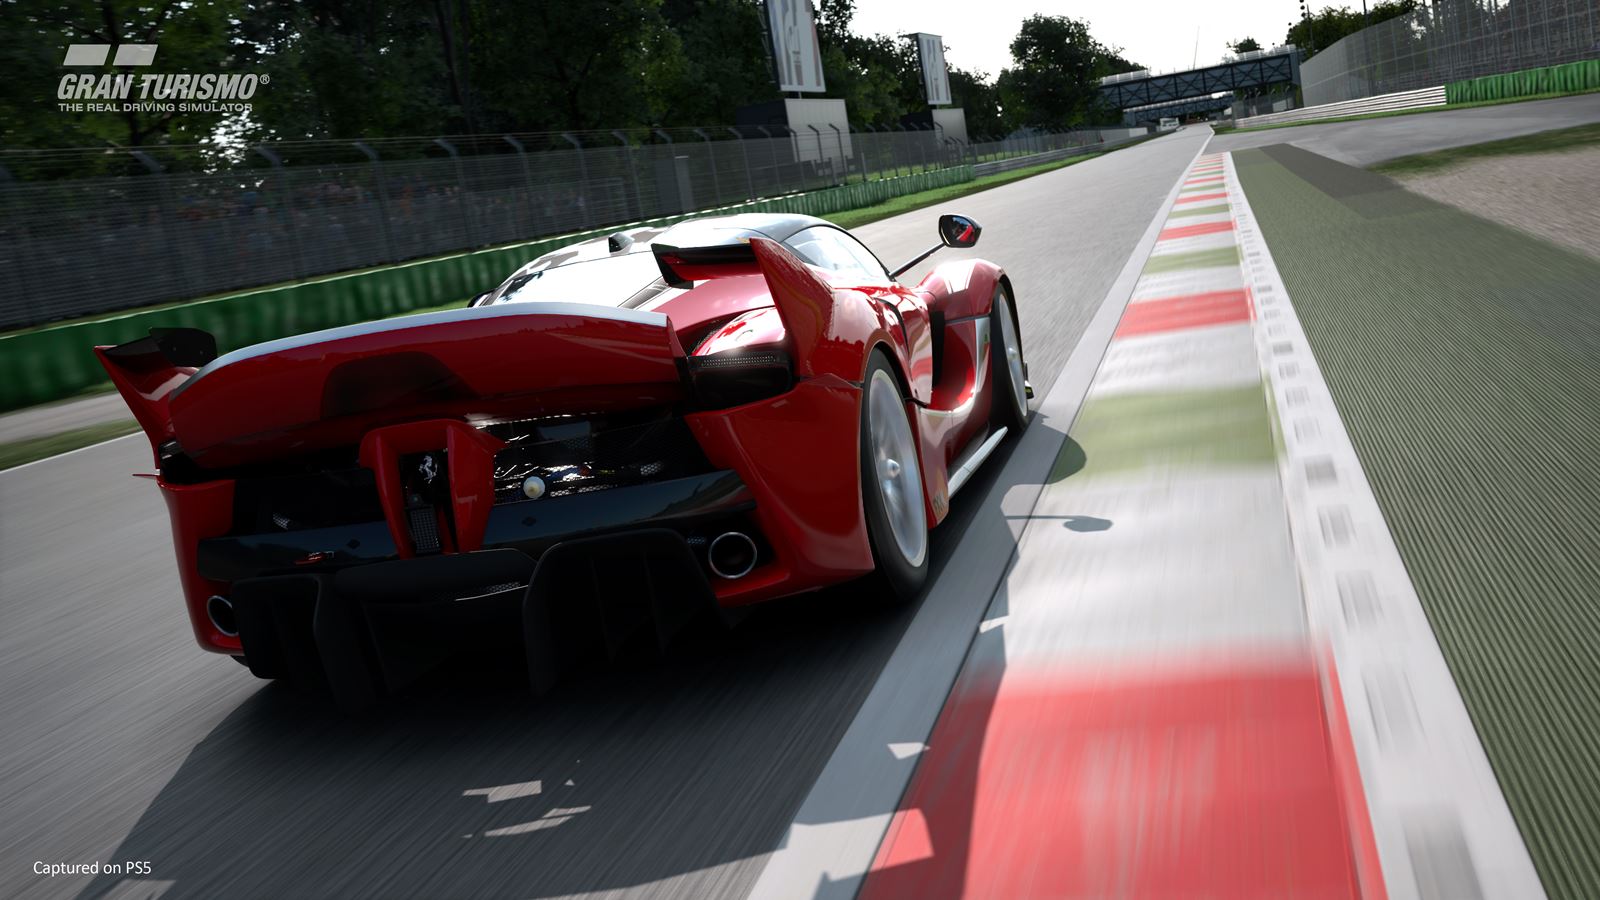 This is Gran Turismo 7 and this is what we thought